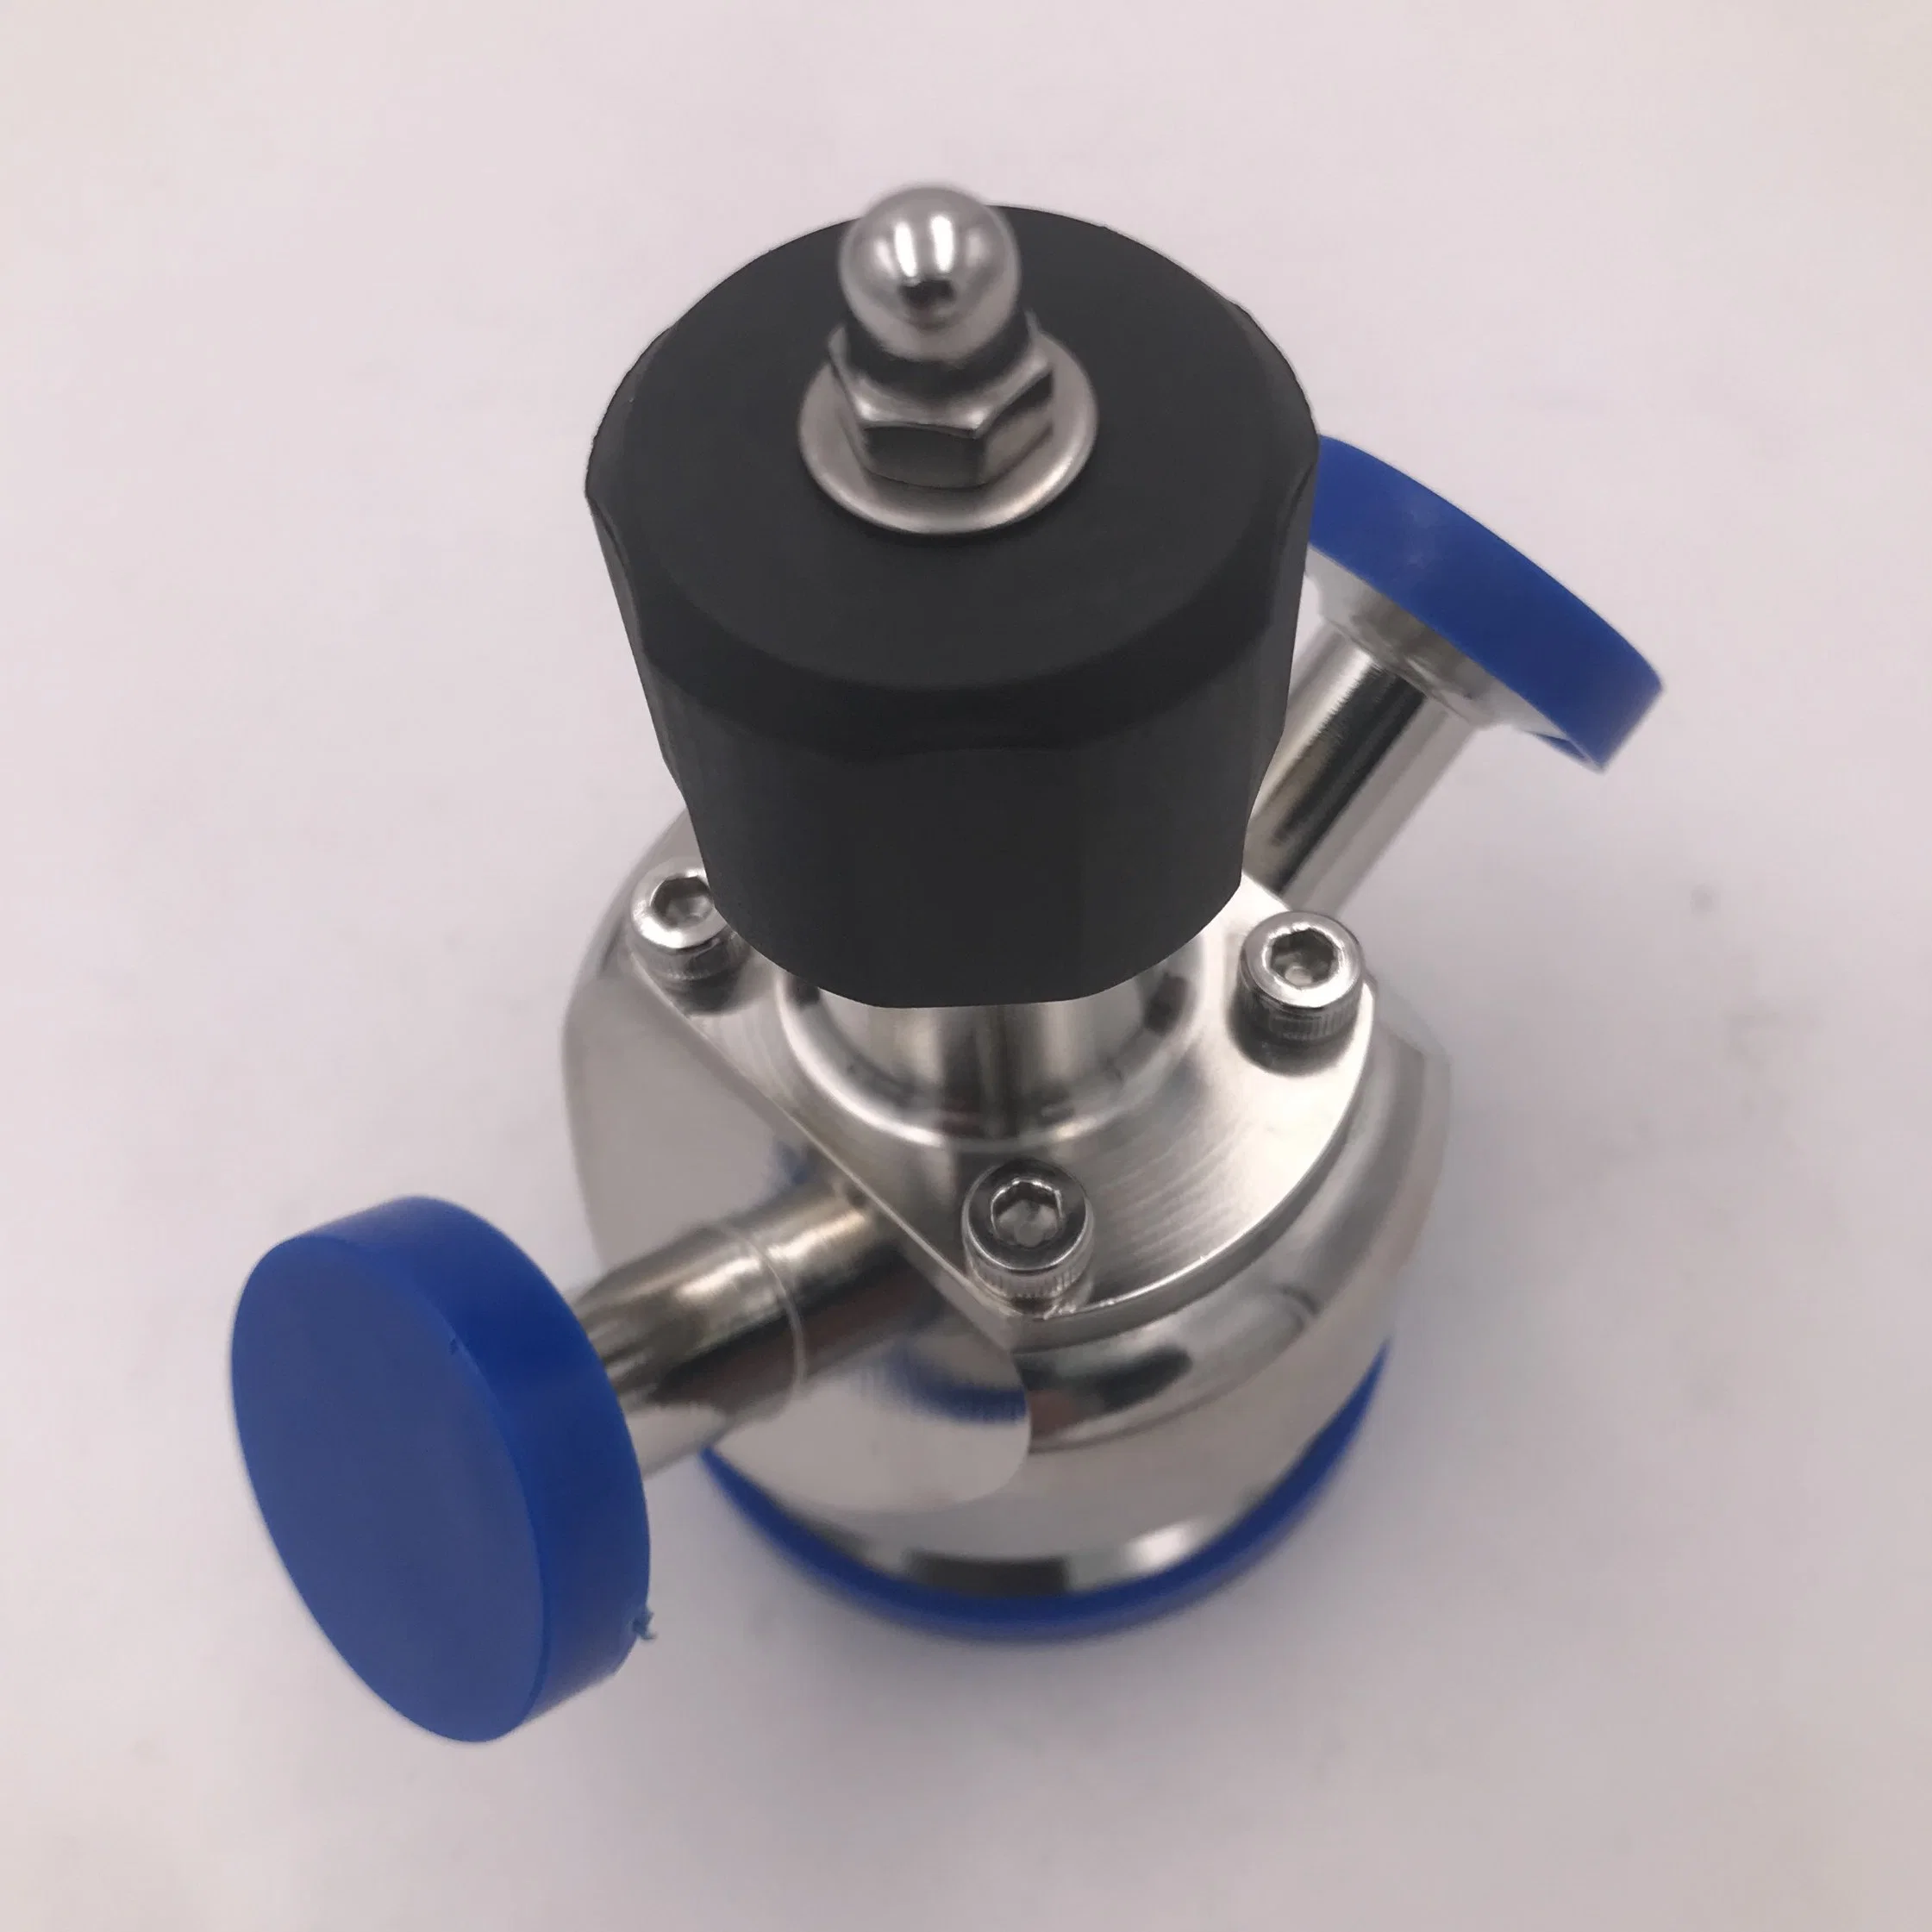 Factory in Stock Aseptic Single-Seat Sterile Sampling Valves with Tc Connection